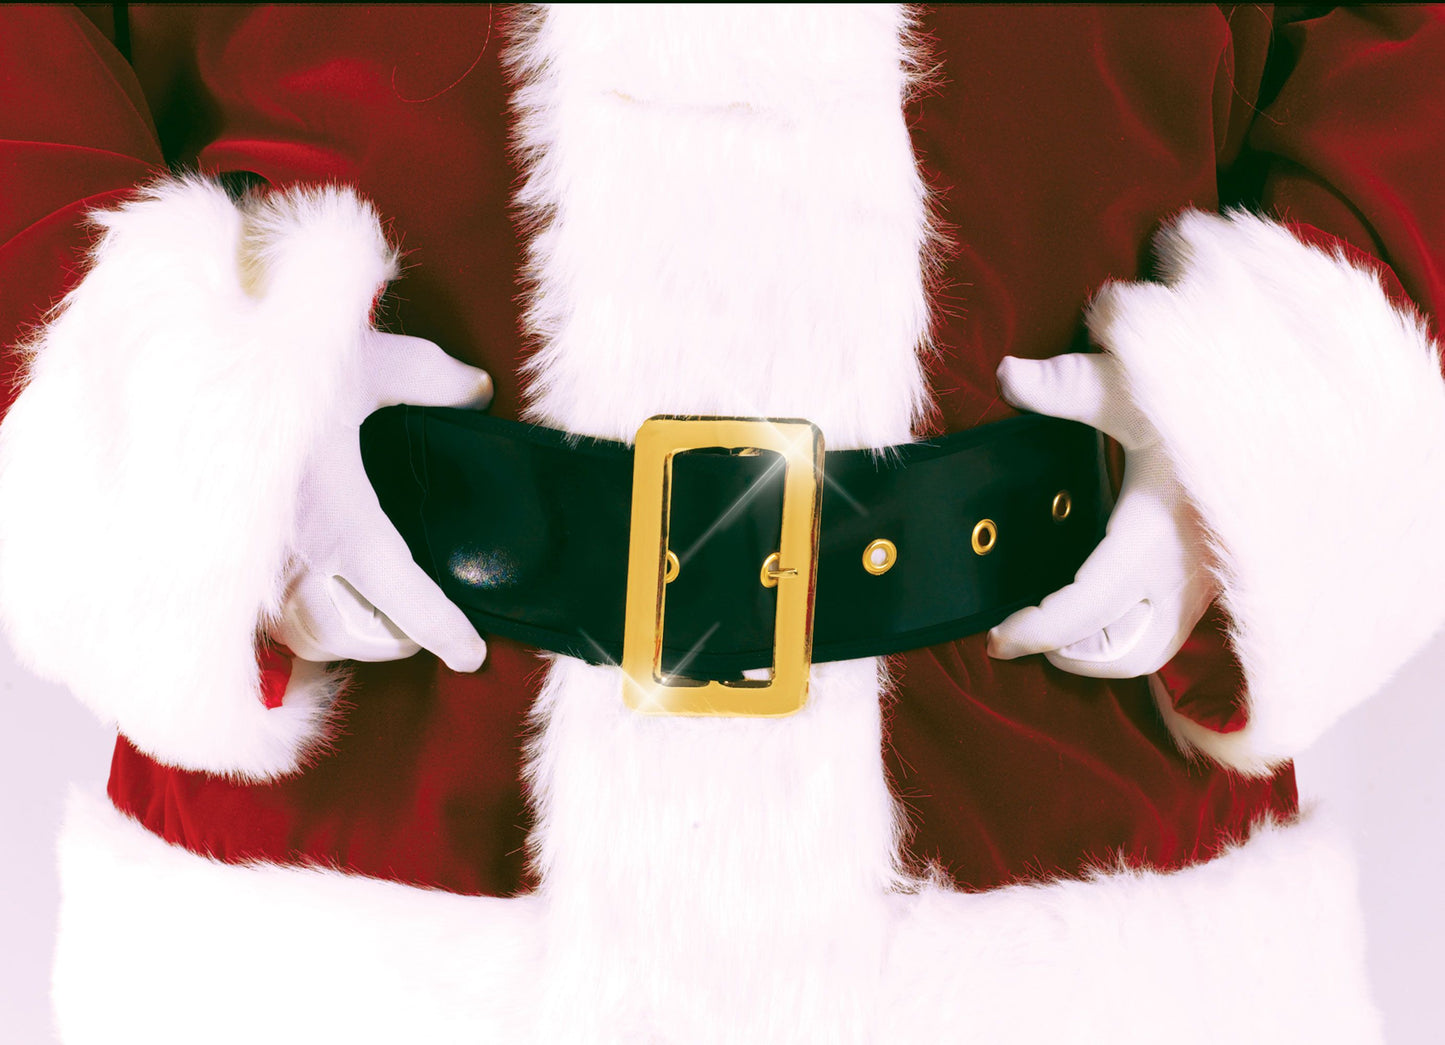 Deluxe Santa Belt Adult Costume Accessory 61 inch belt with 5 inch gold buckle and grommets